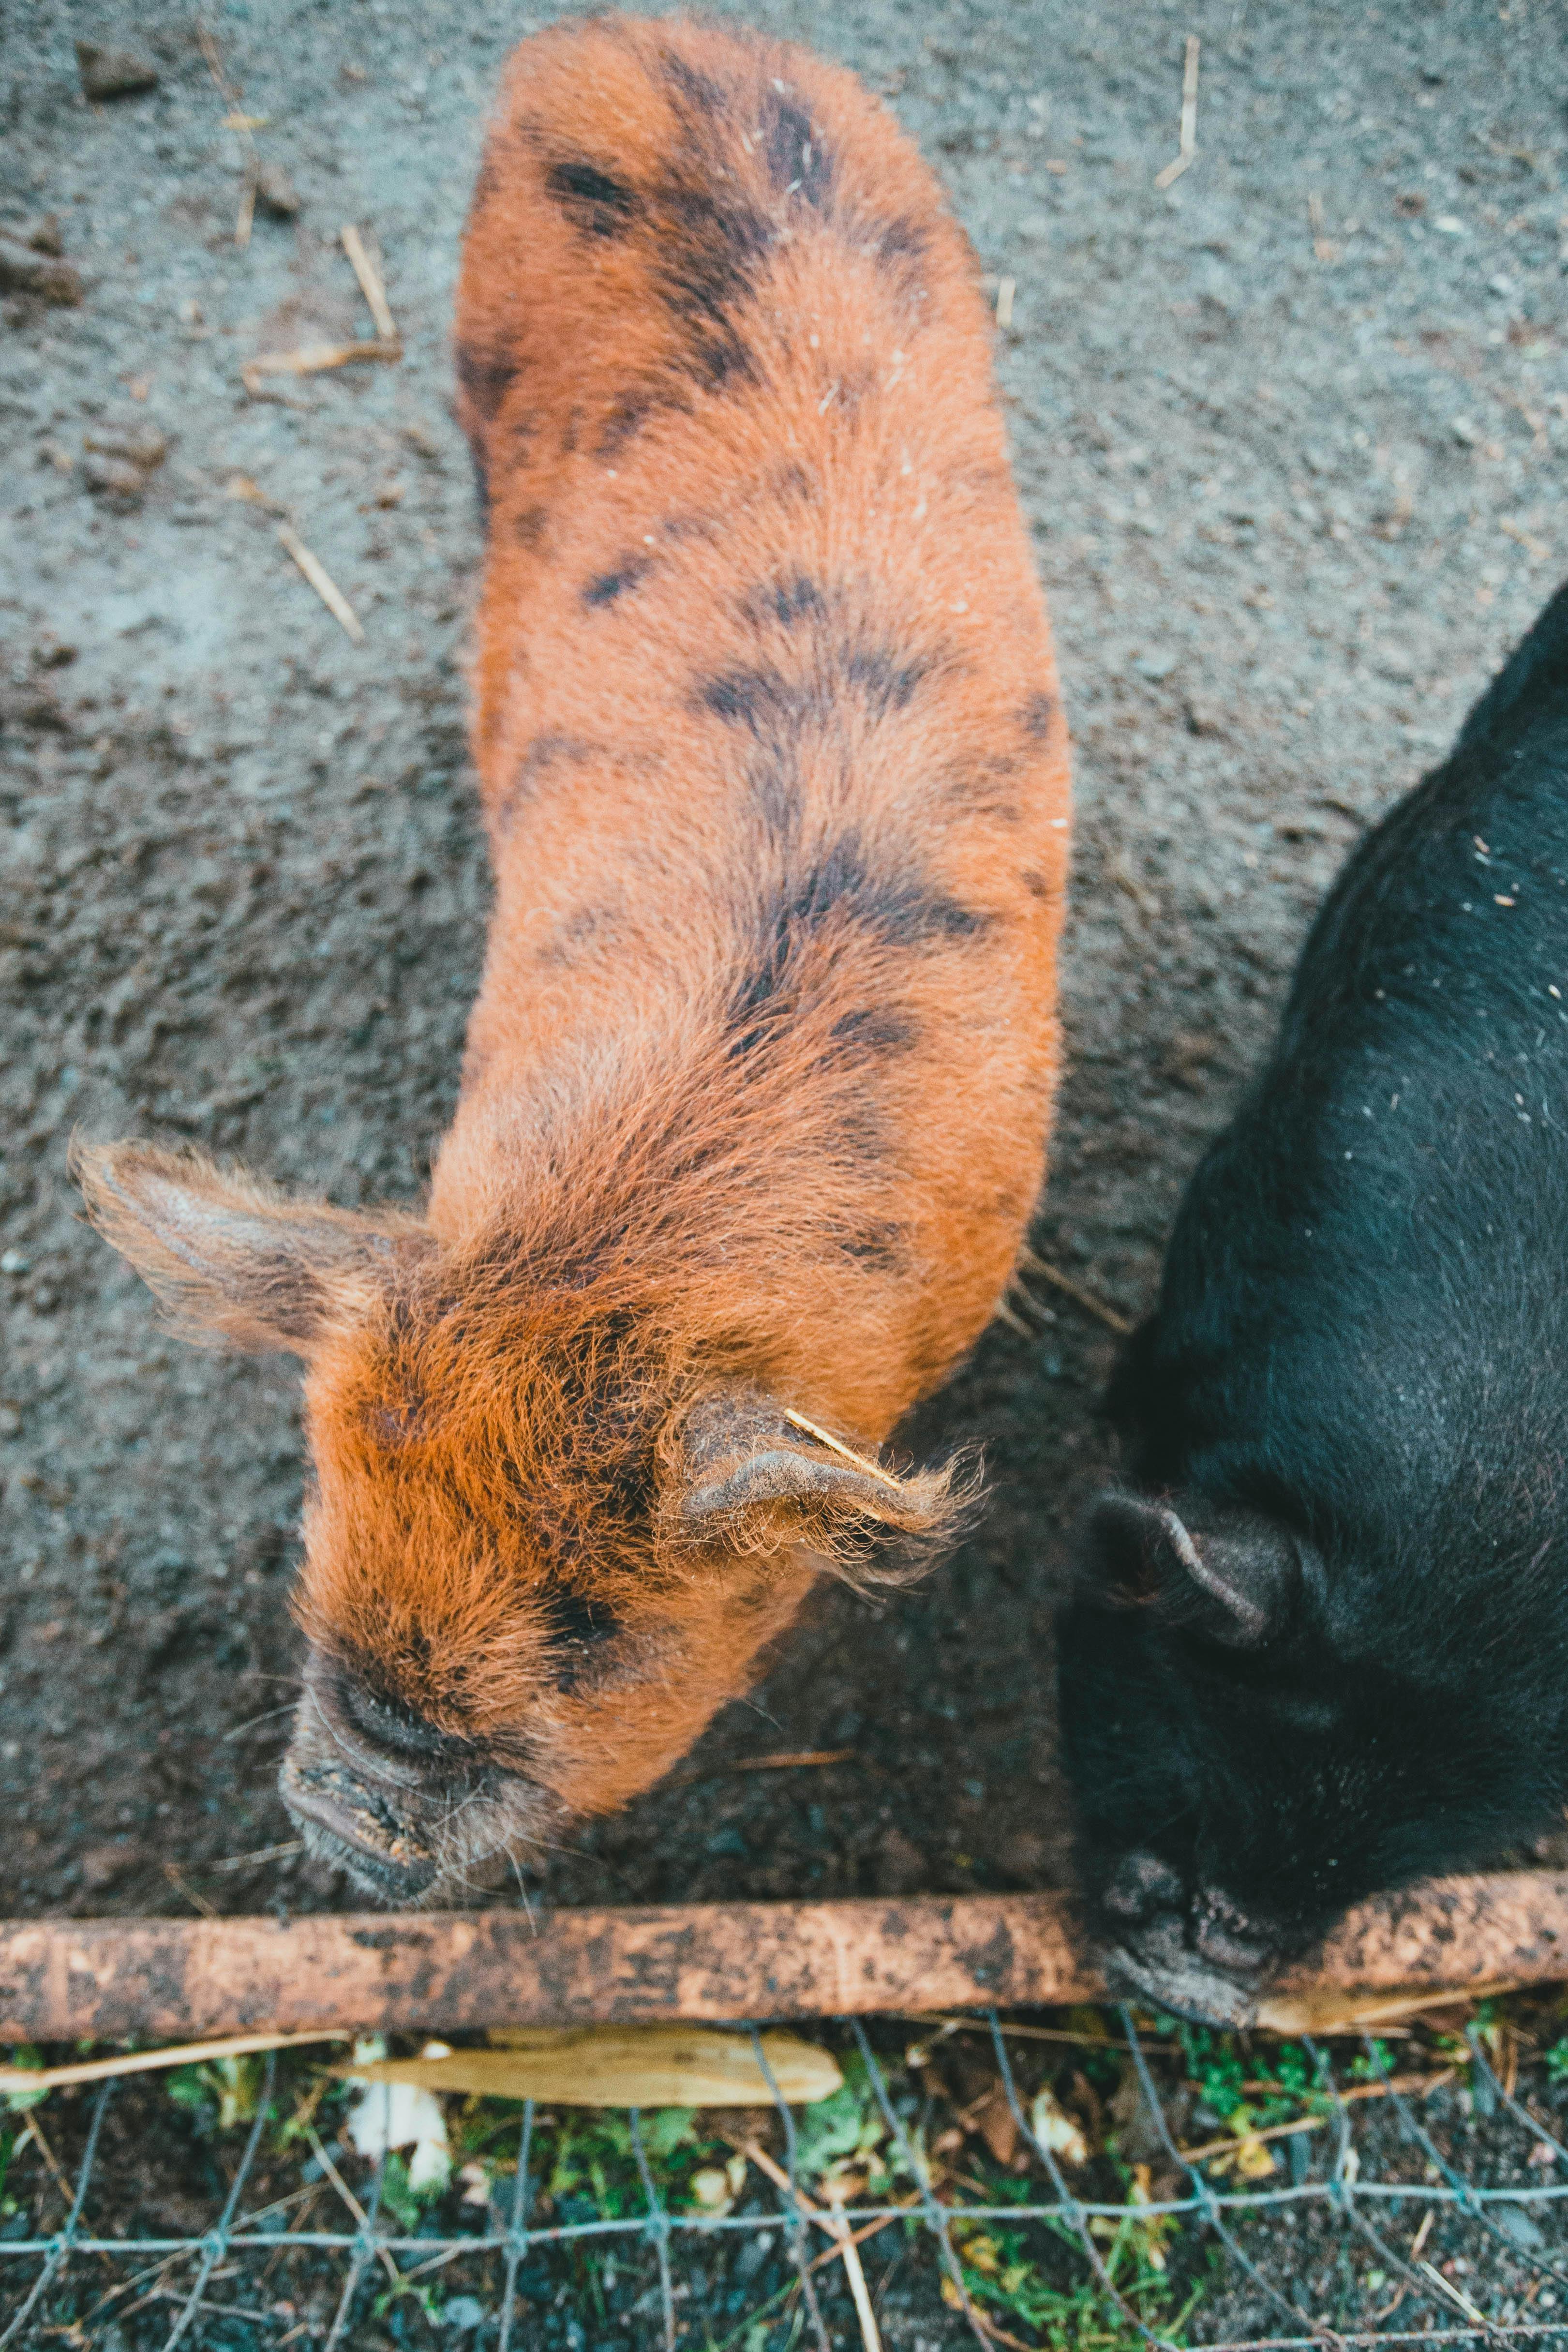 black and brown pigs standing on dirt ground